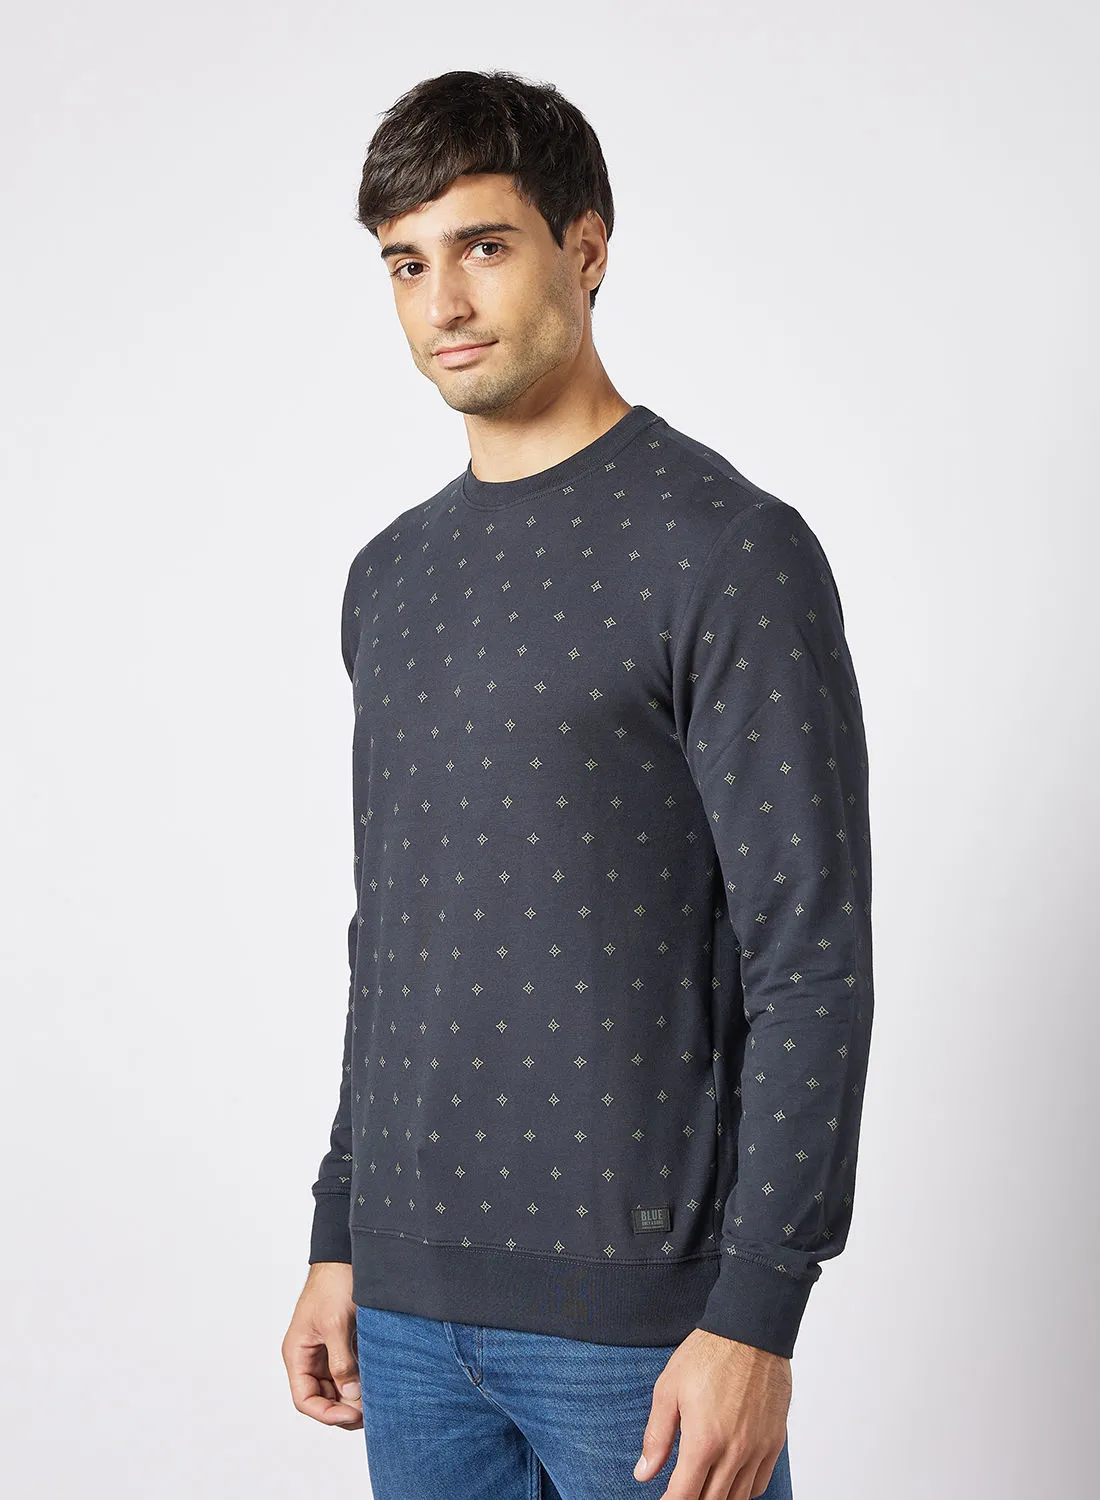 ONLY & SONS All-Over Print Sweatshirt Navy